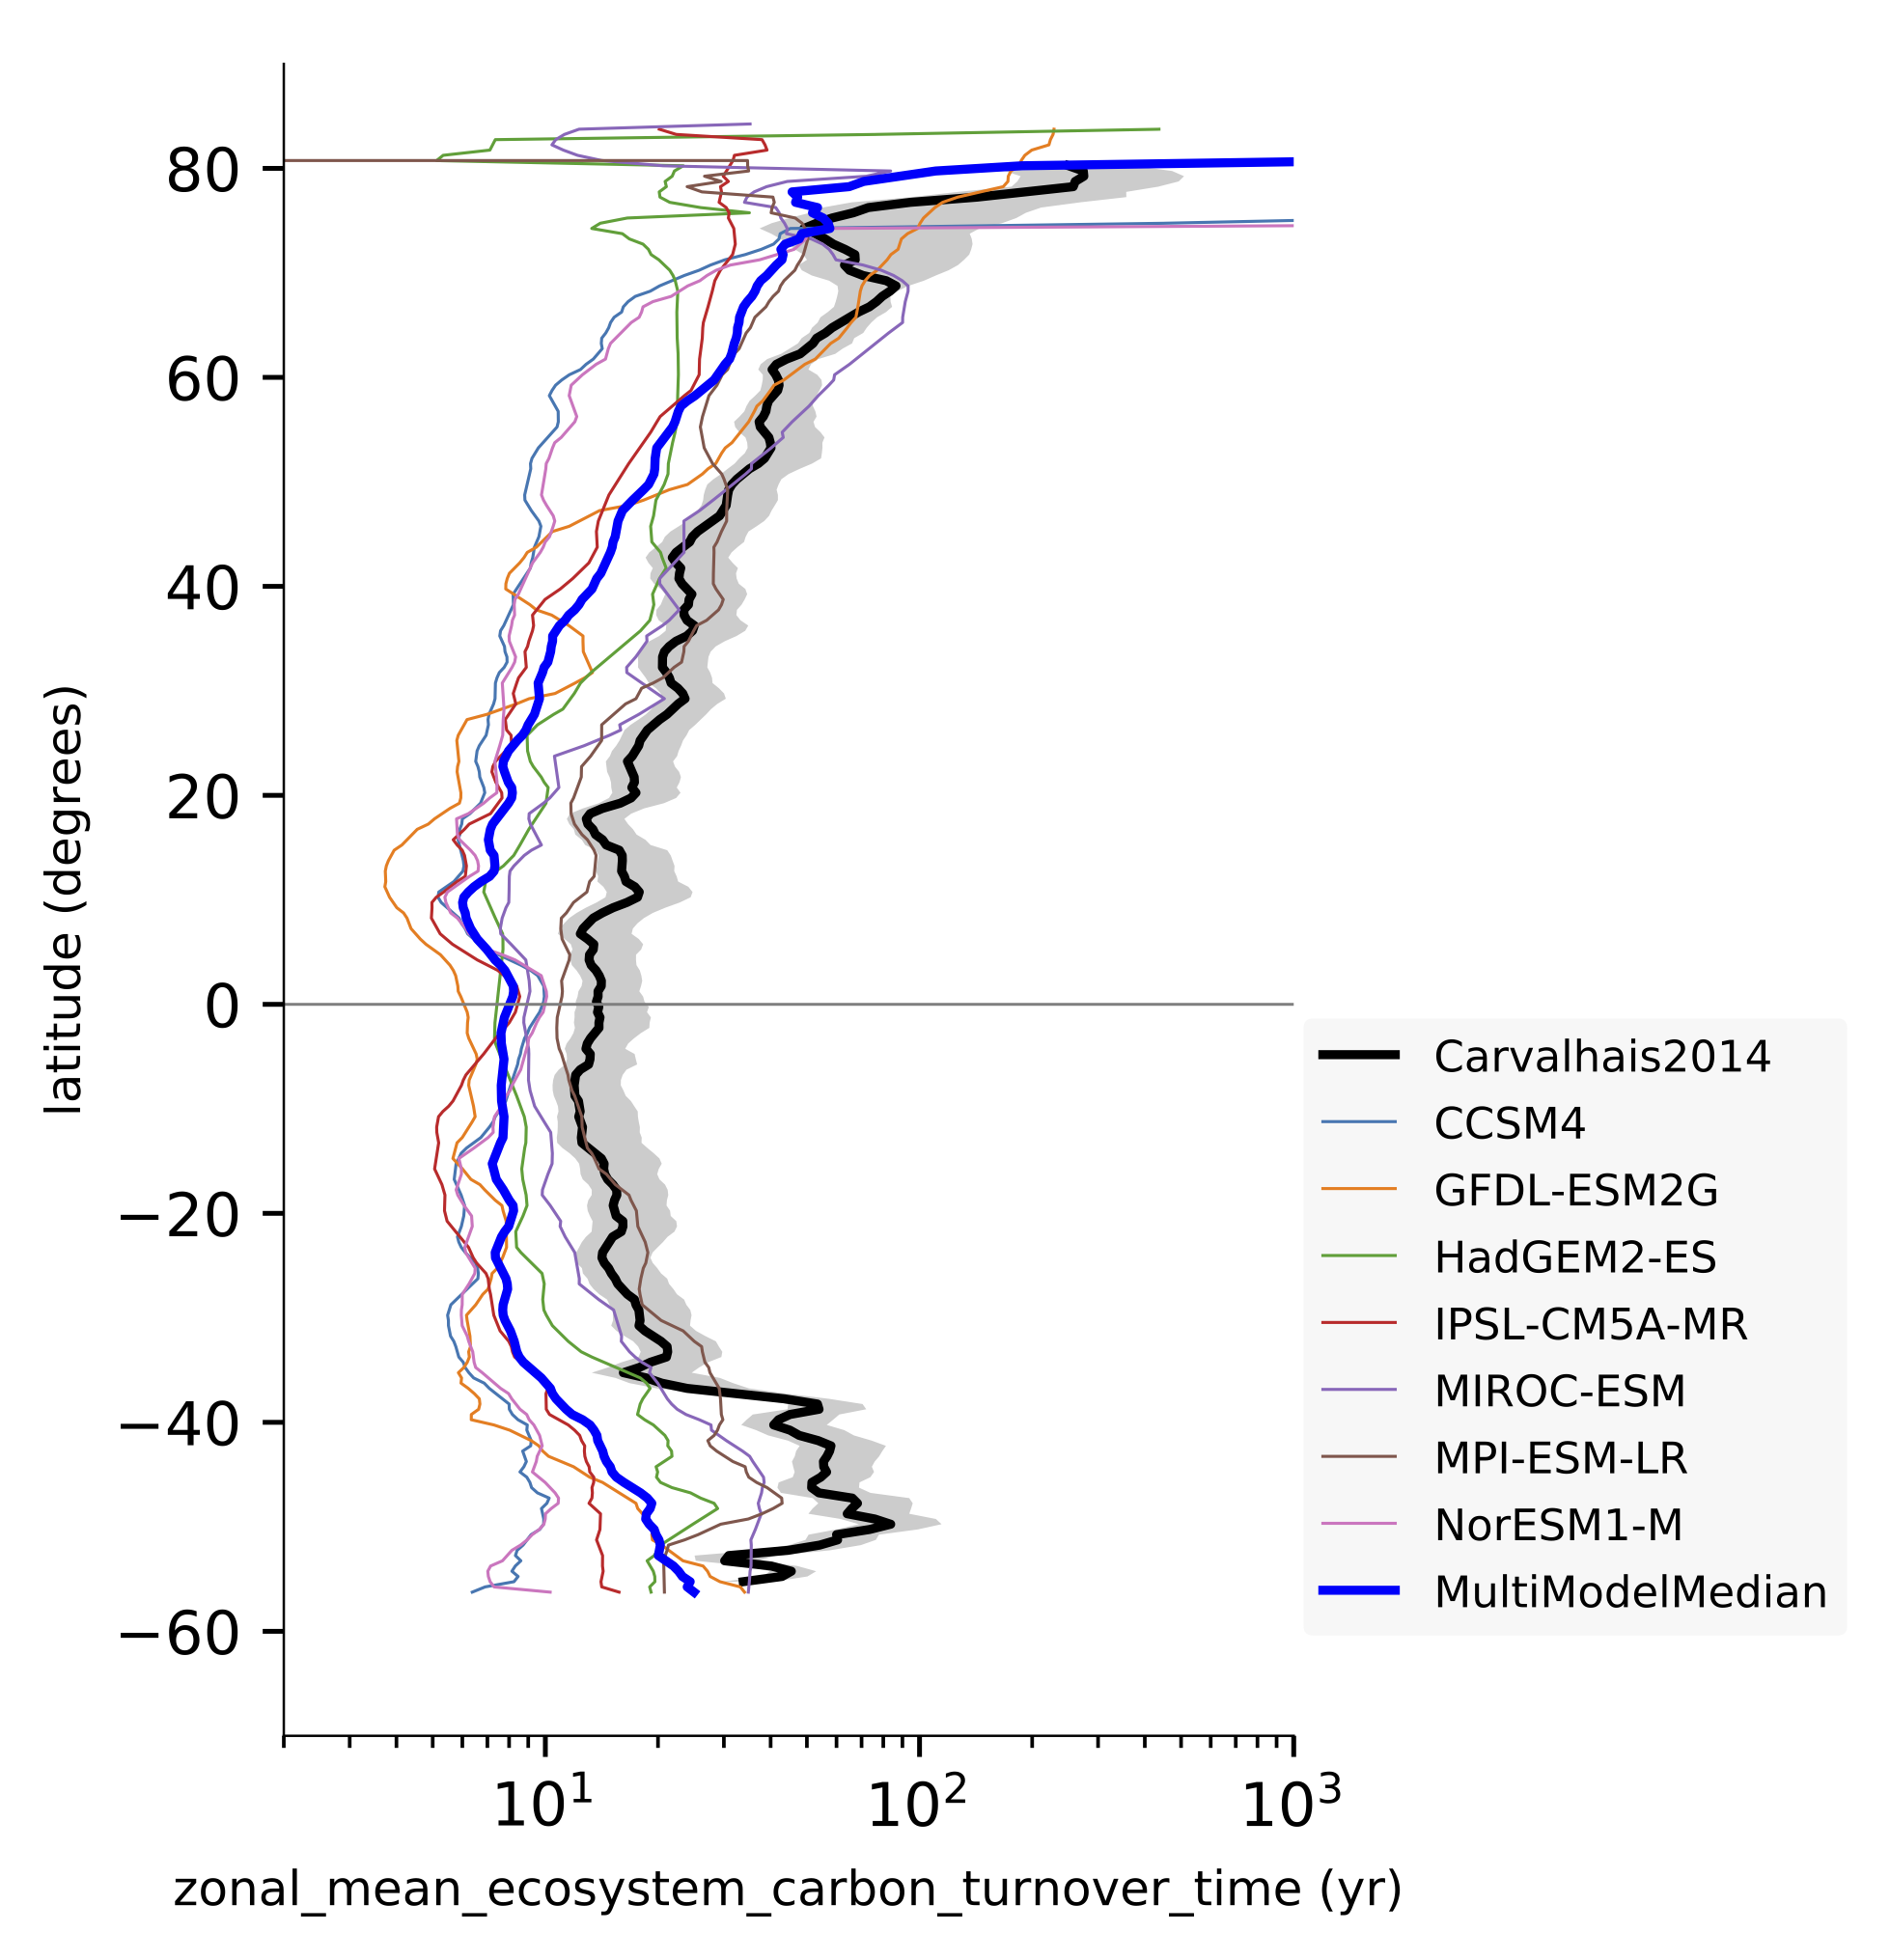 ../_images/zonal_mean_ecosystem_carbon_turnover_time_Carvalhais2014_gnz.png